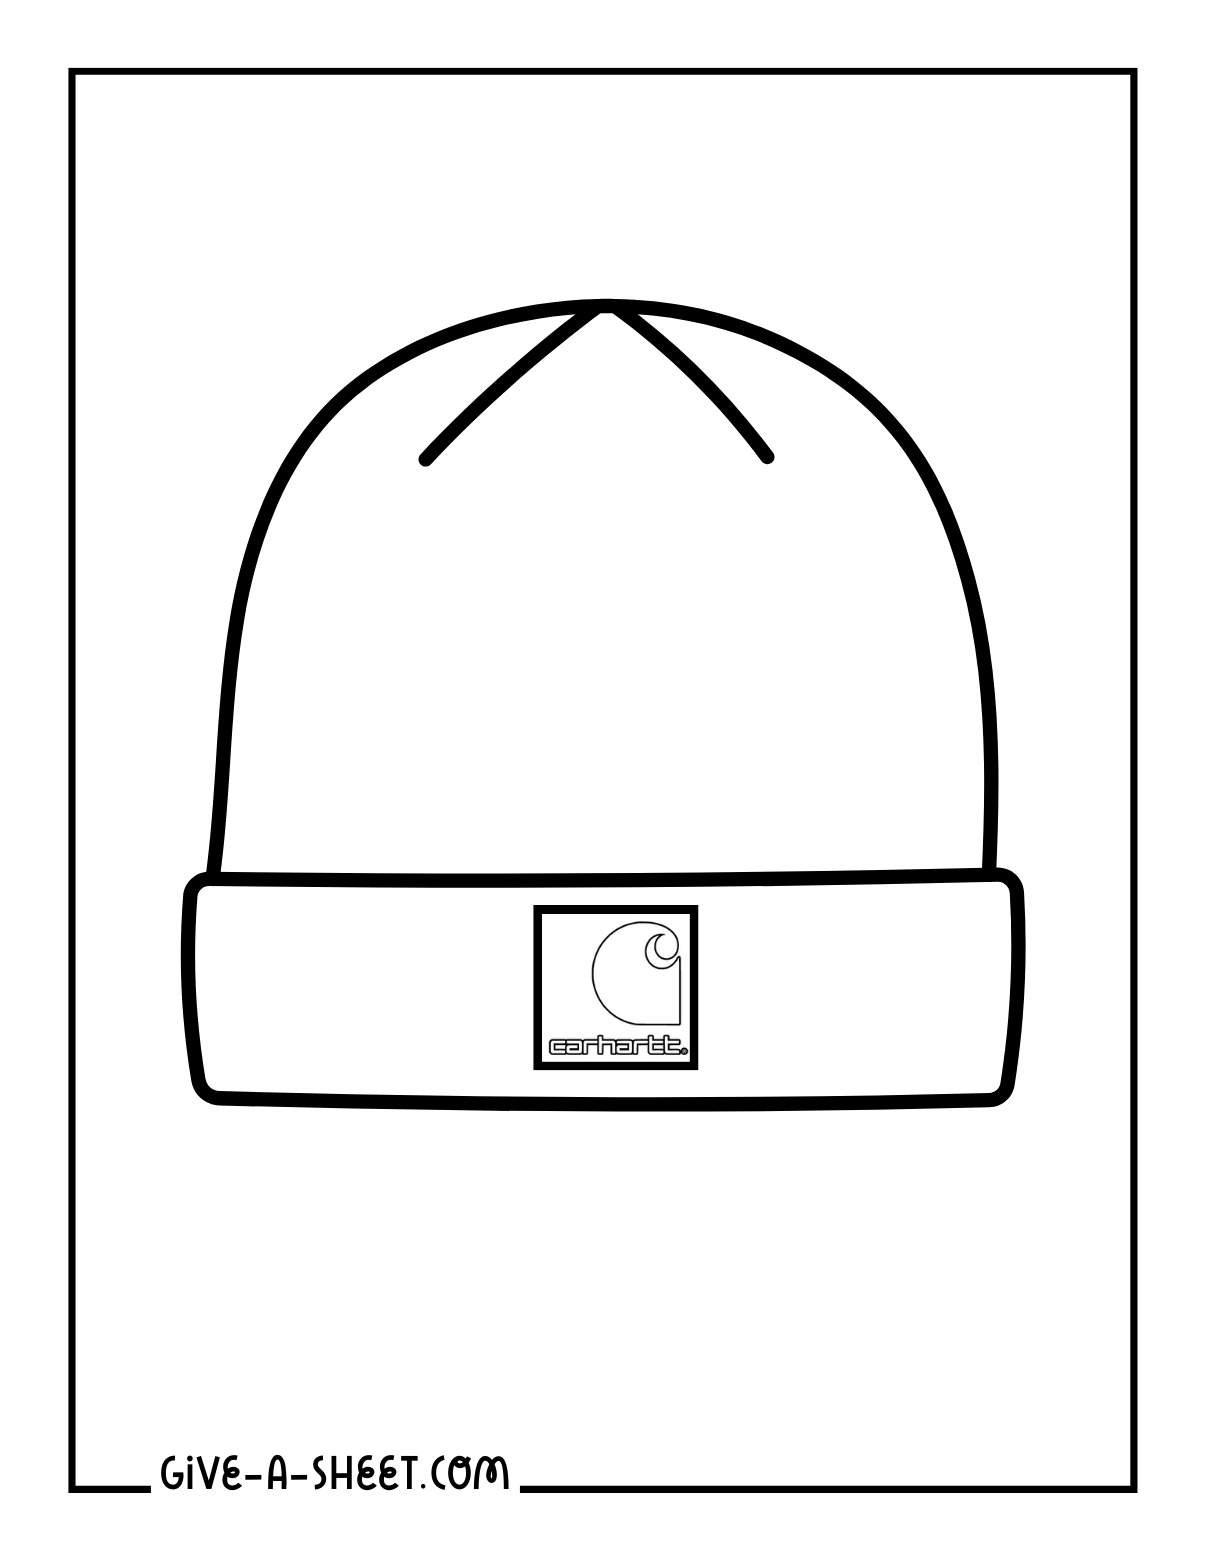 Cuffed Carhartt beanie coloring page.